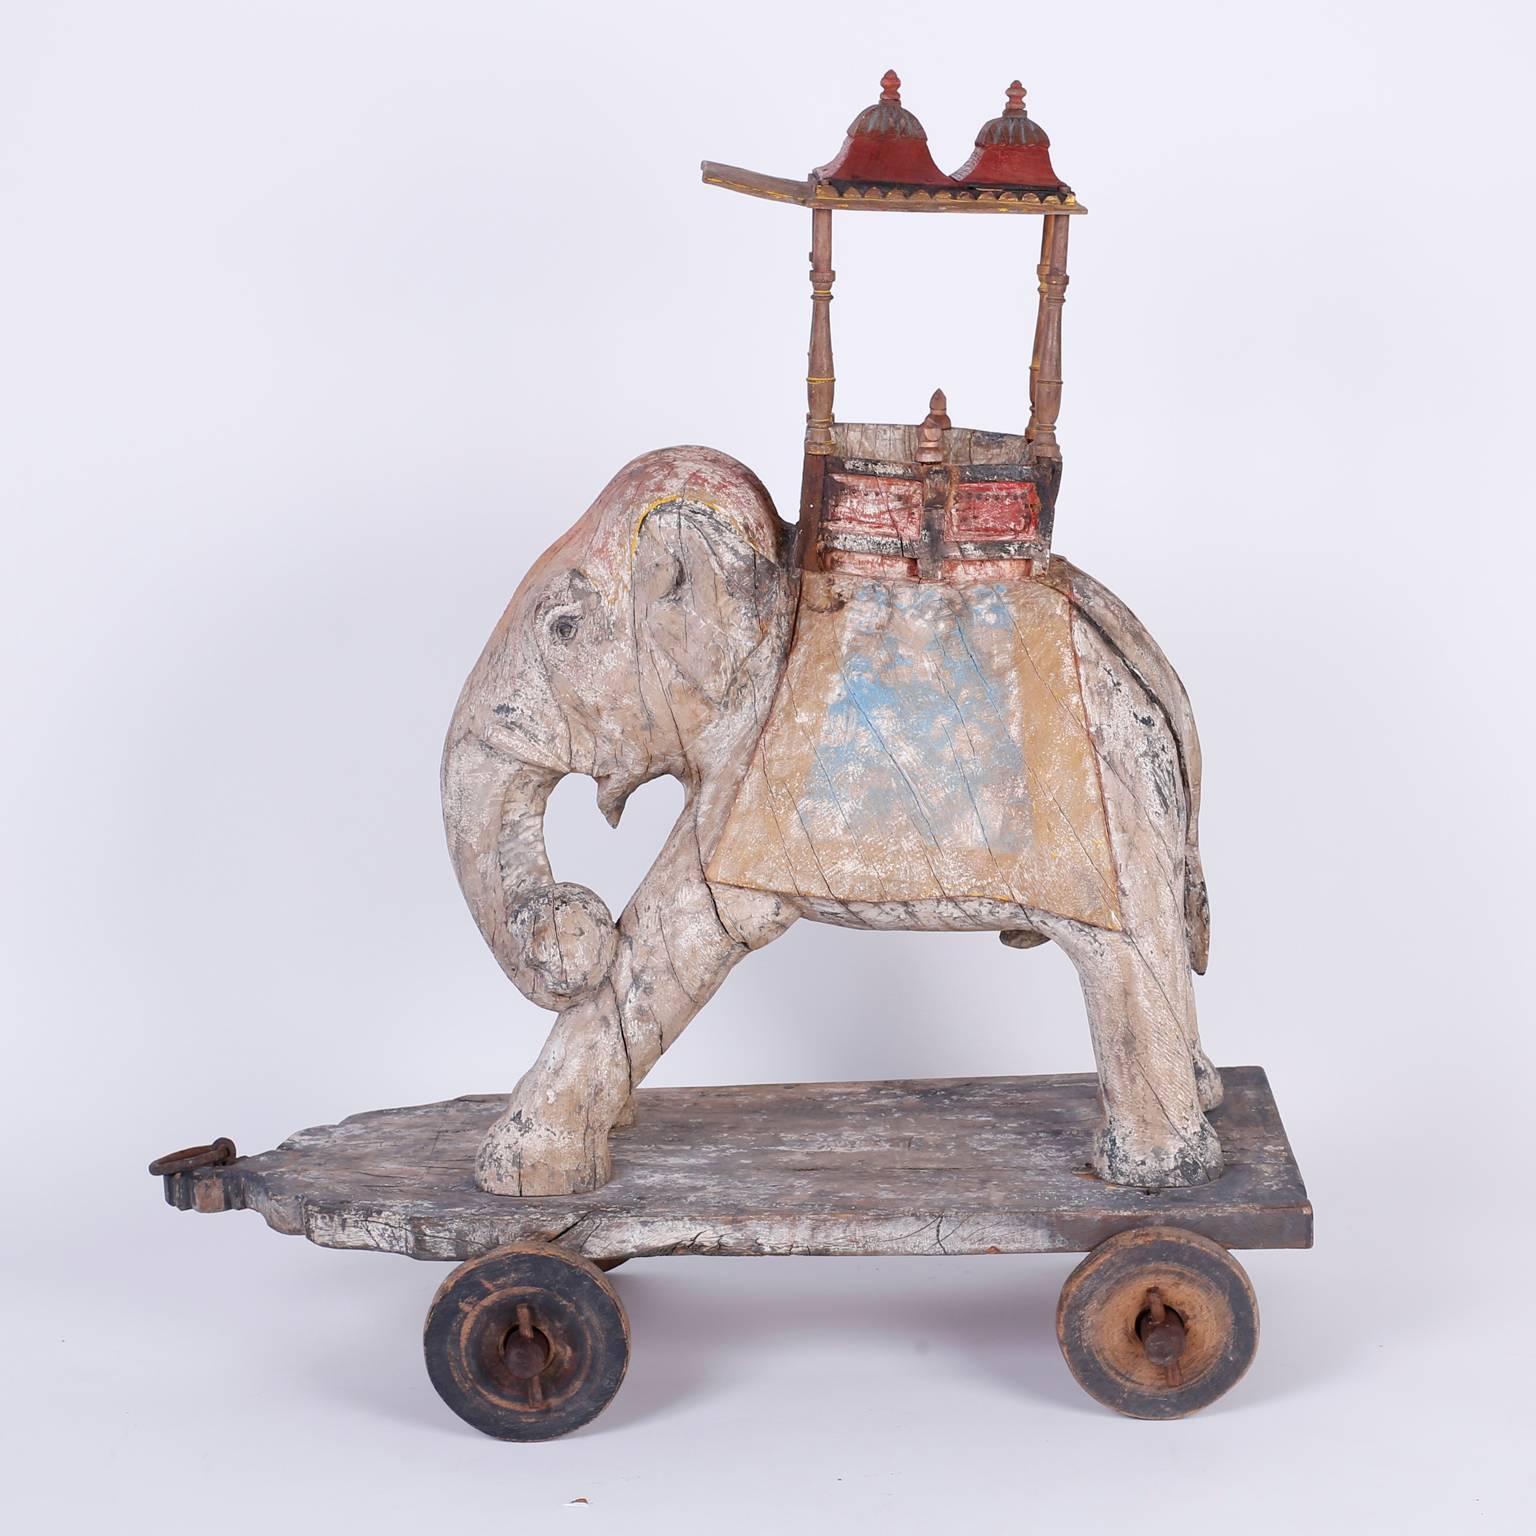 Carved wood antique Anglo-Indian elephant carrying an architecturally interesting howdah and riding on a wood base with wheels. Retaining some of its original paint giving this mobile Pachyderm a charming folky presence, probably a child's toy.